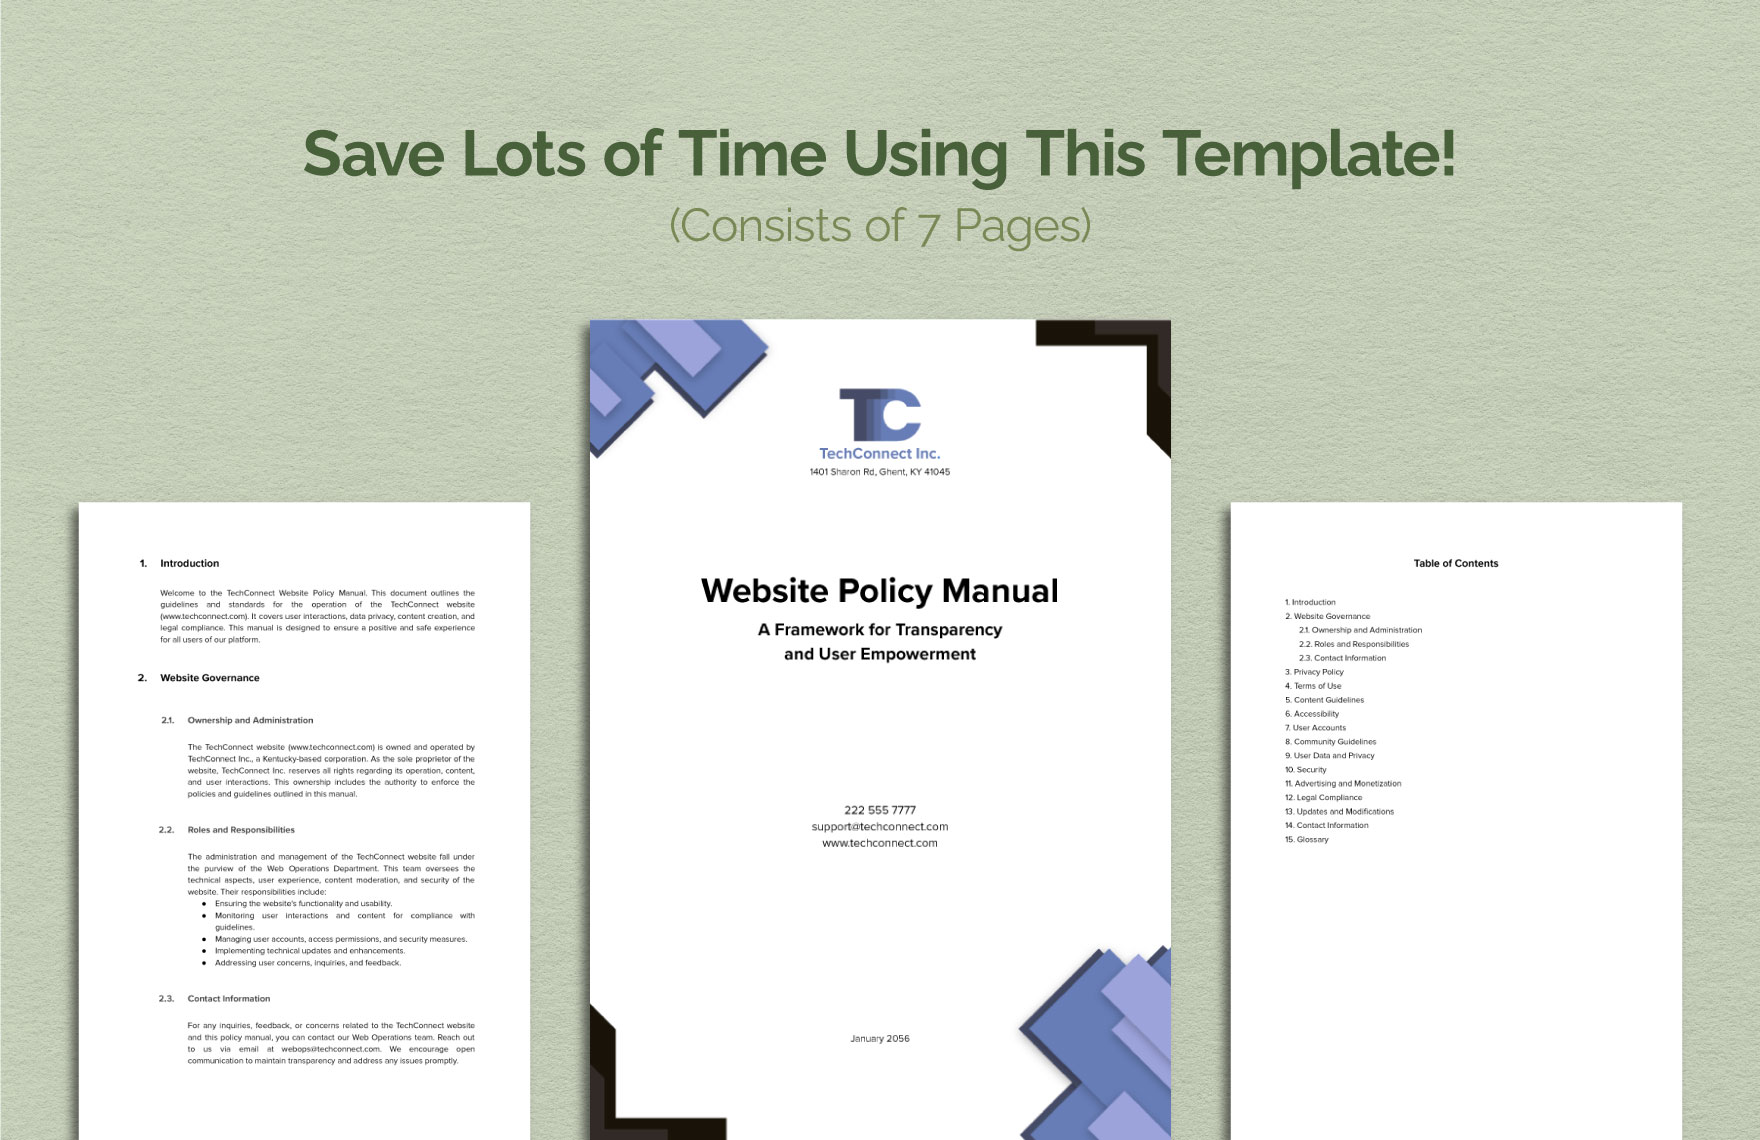 Modern Website Policy Manual Template